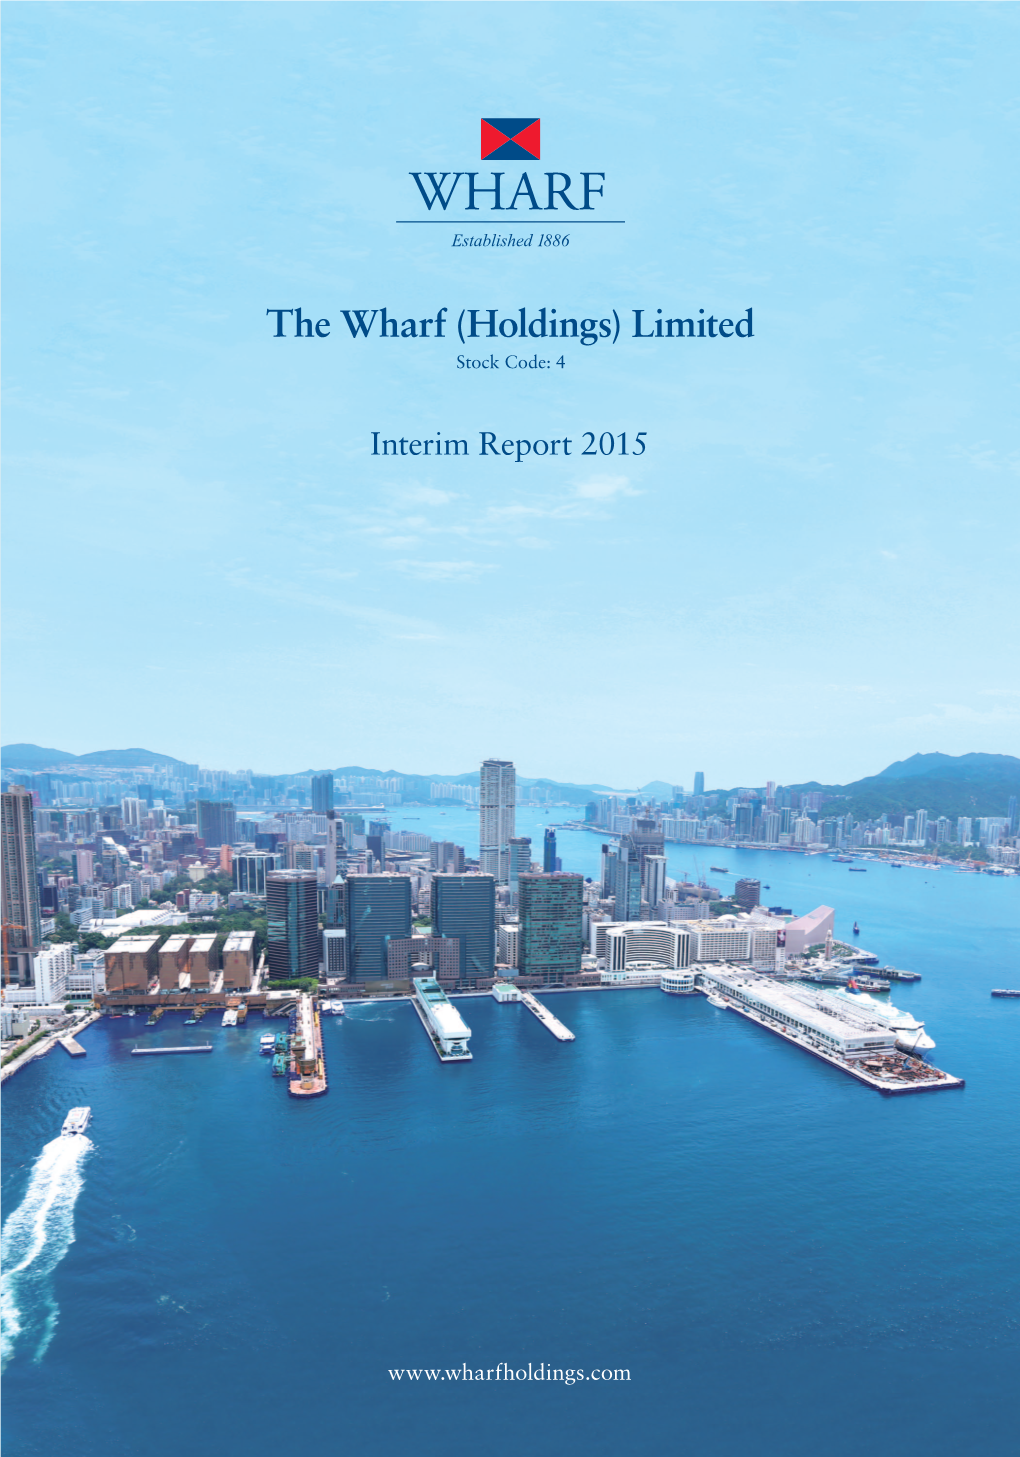 The Wharf (Holdings) Limited 股份代號: 4 Stock Code: 4